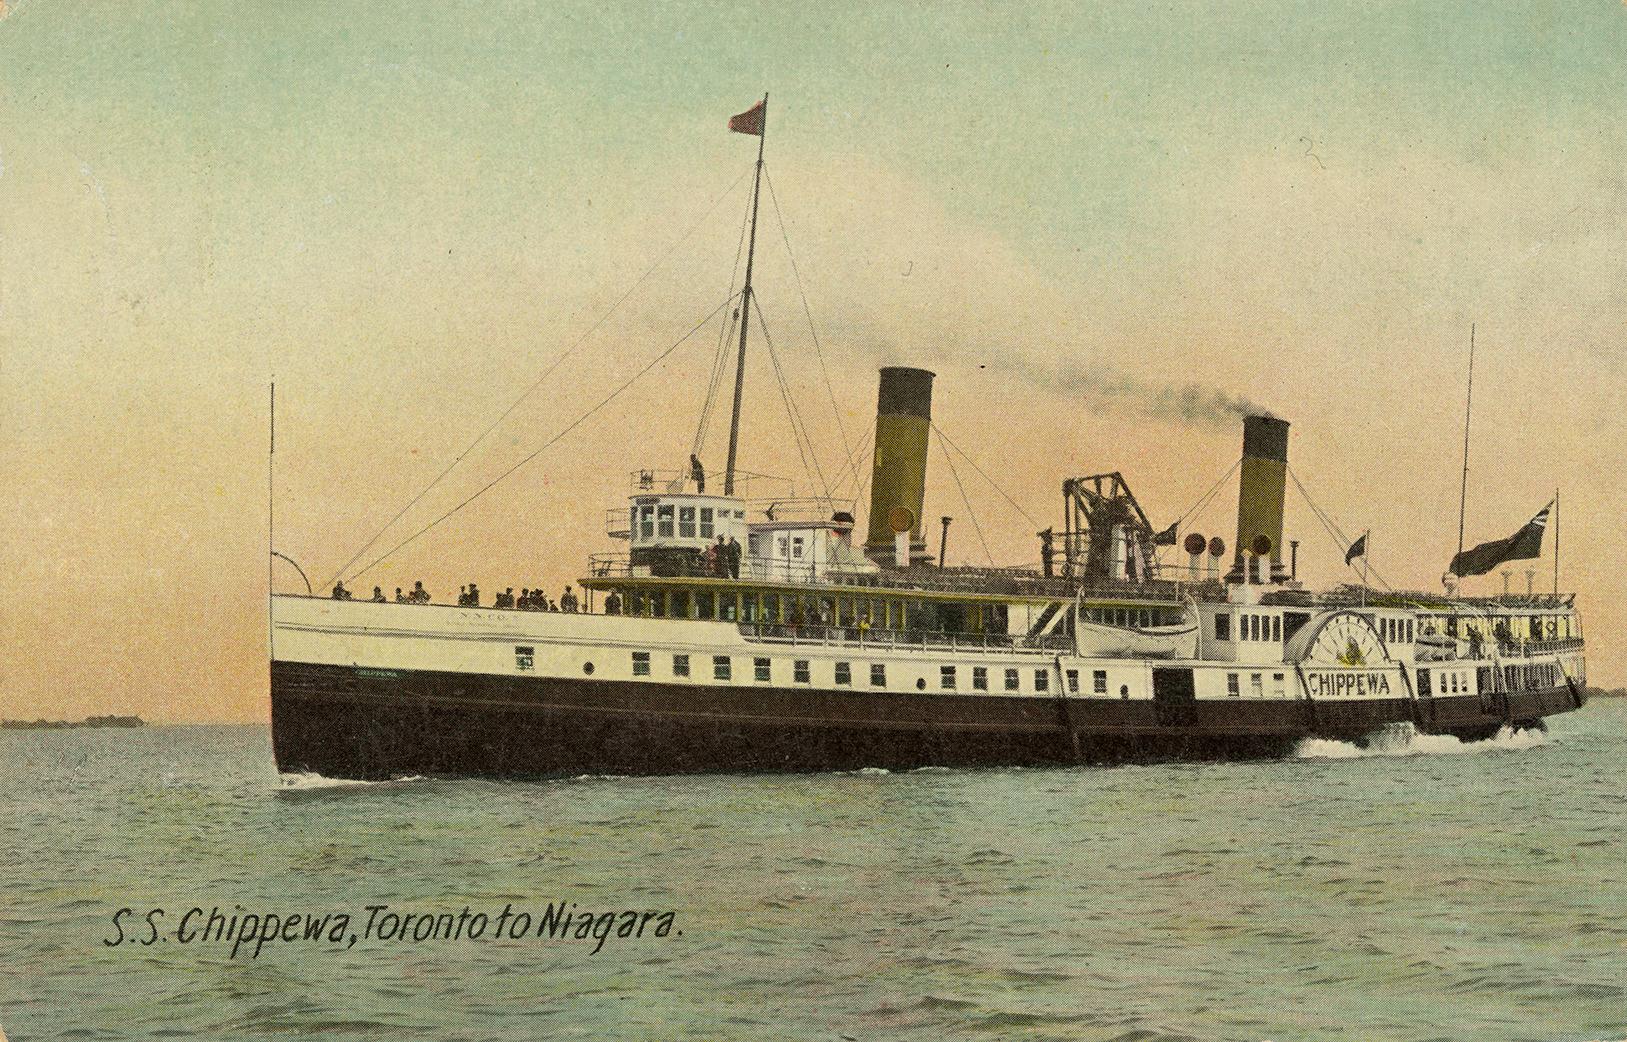 Colorized photograph of a large steamship on open water